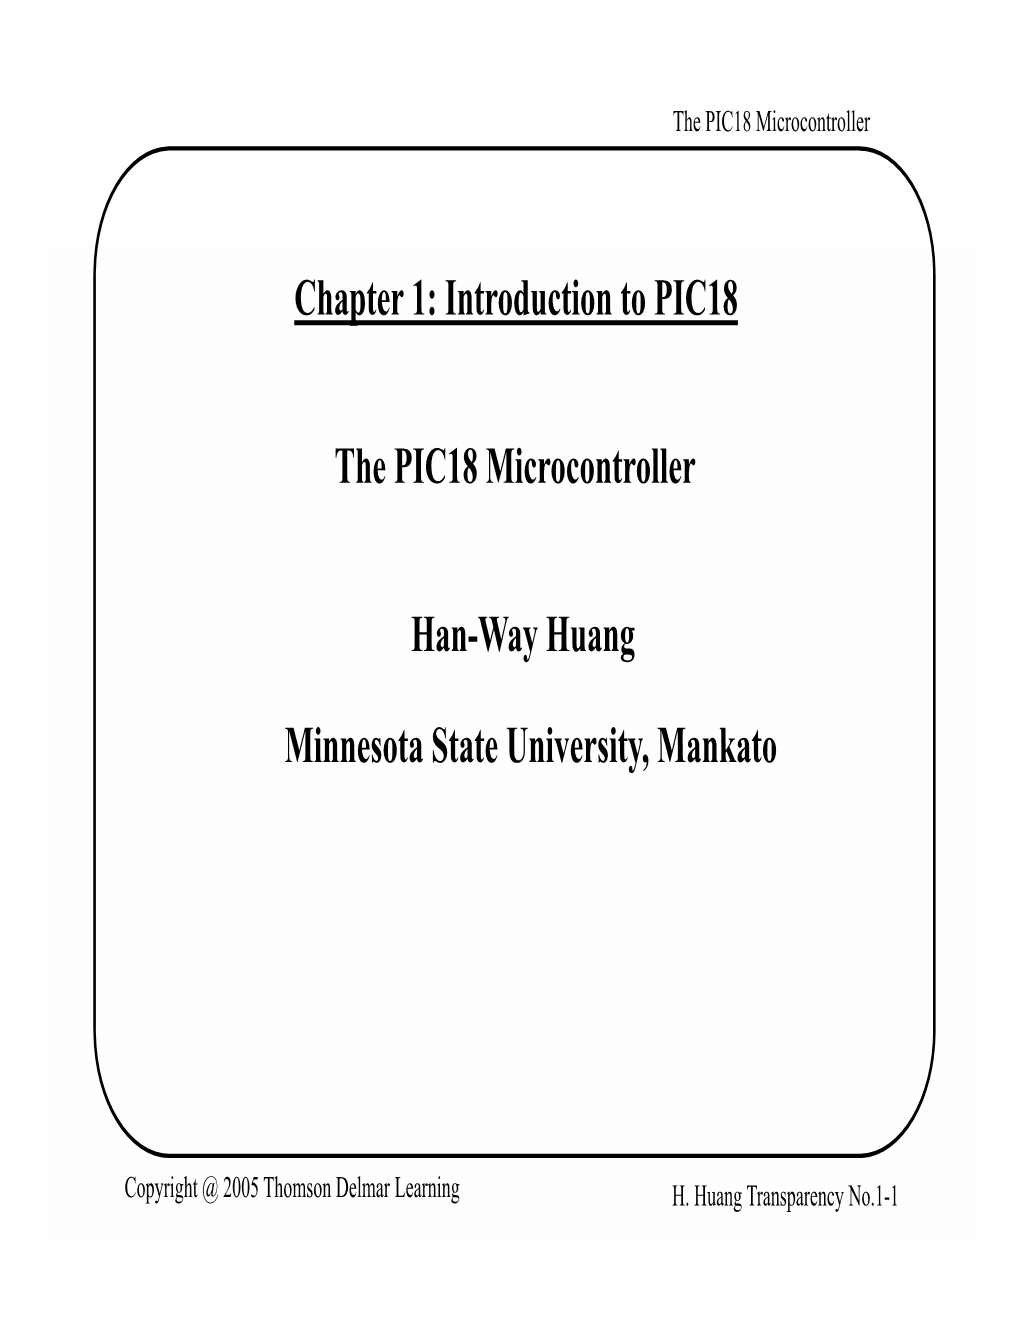 Chapter 1: Introduction to PIC18 the PIC18 Microcontroller Han-Way